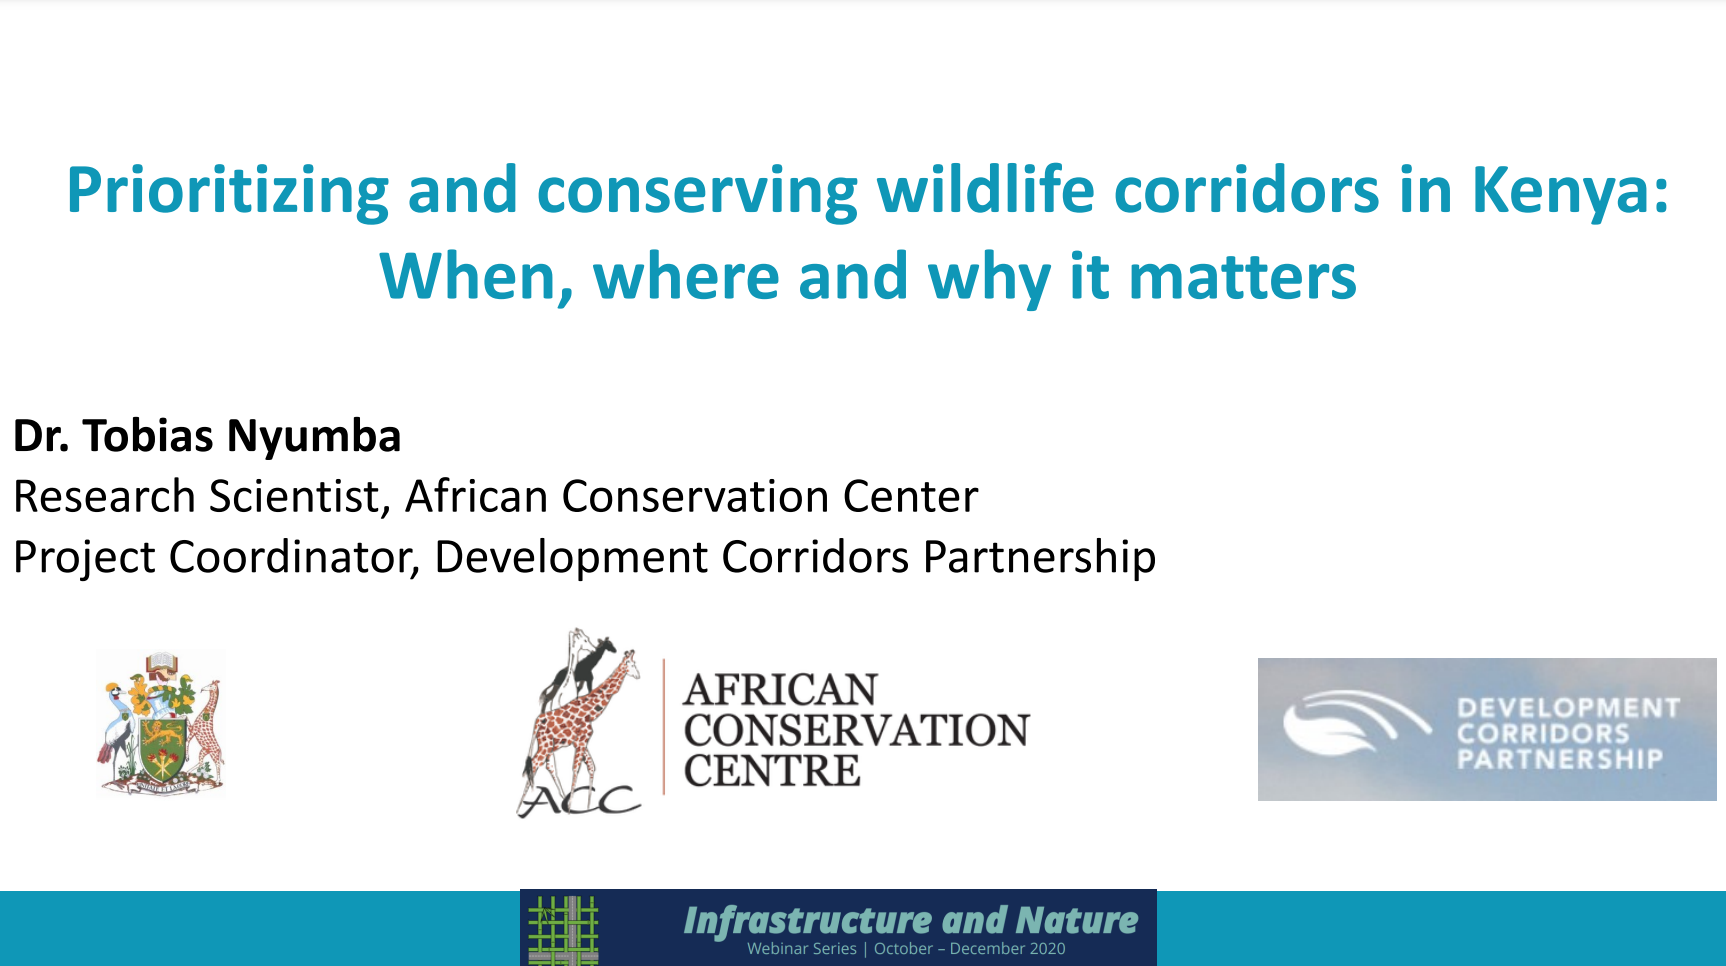 Prioritizing and conserving wildlife corridors in Kenya: when, where and why it matters